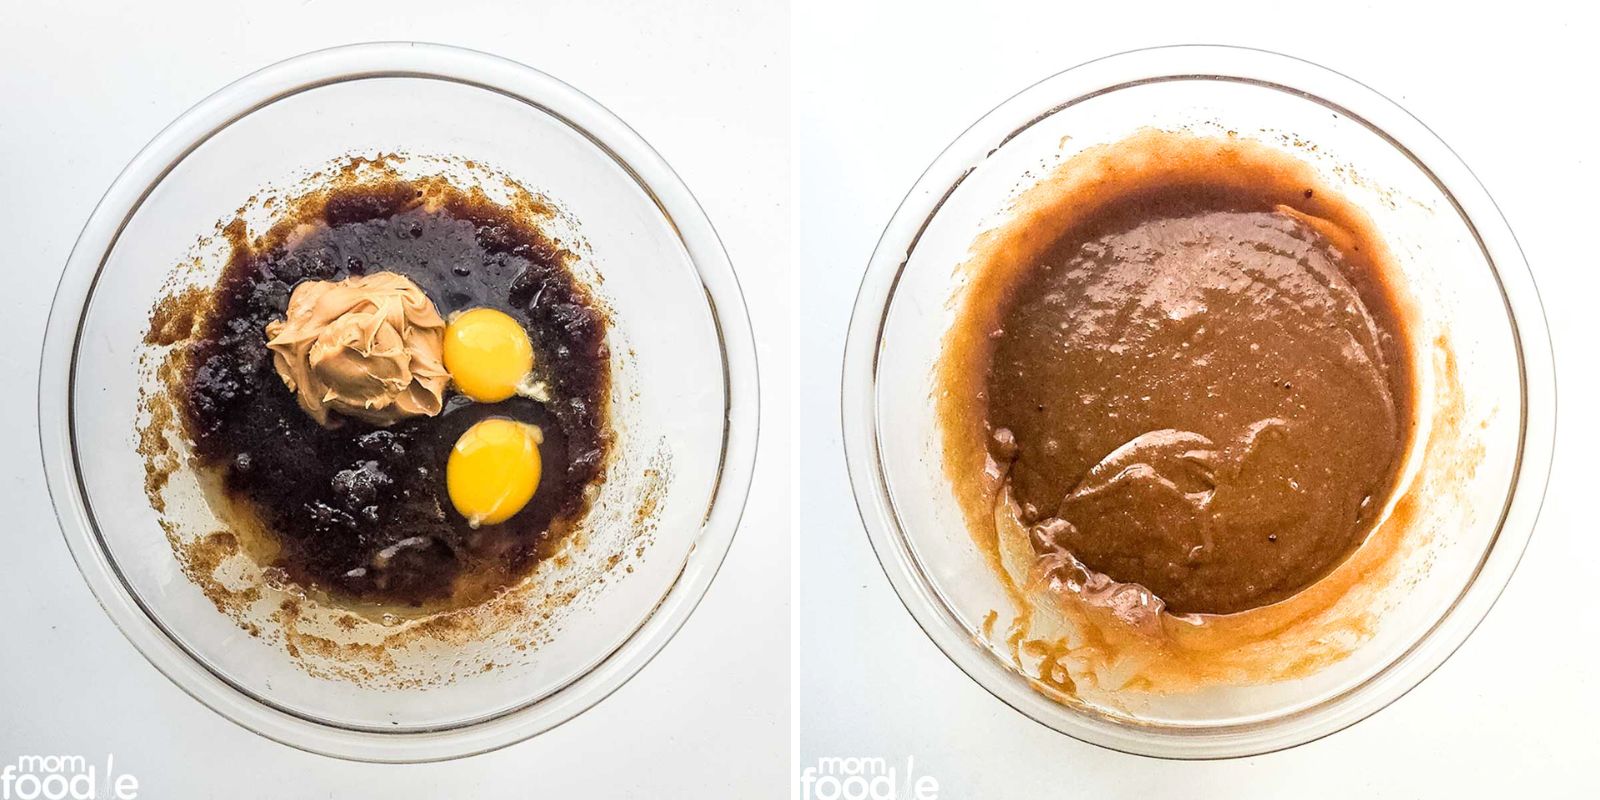  left: peanut butter, eggs and vanilla poured over mixture of melted butter and brown sugar
right: the smooth mixture after whisking wet ingredients together